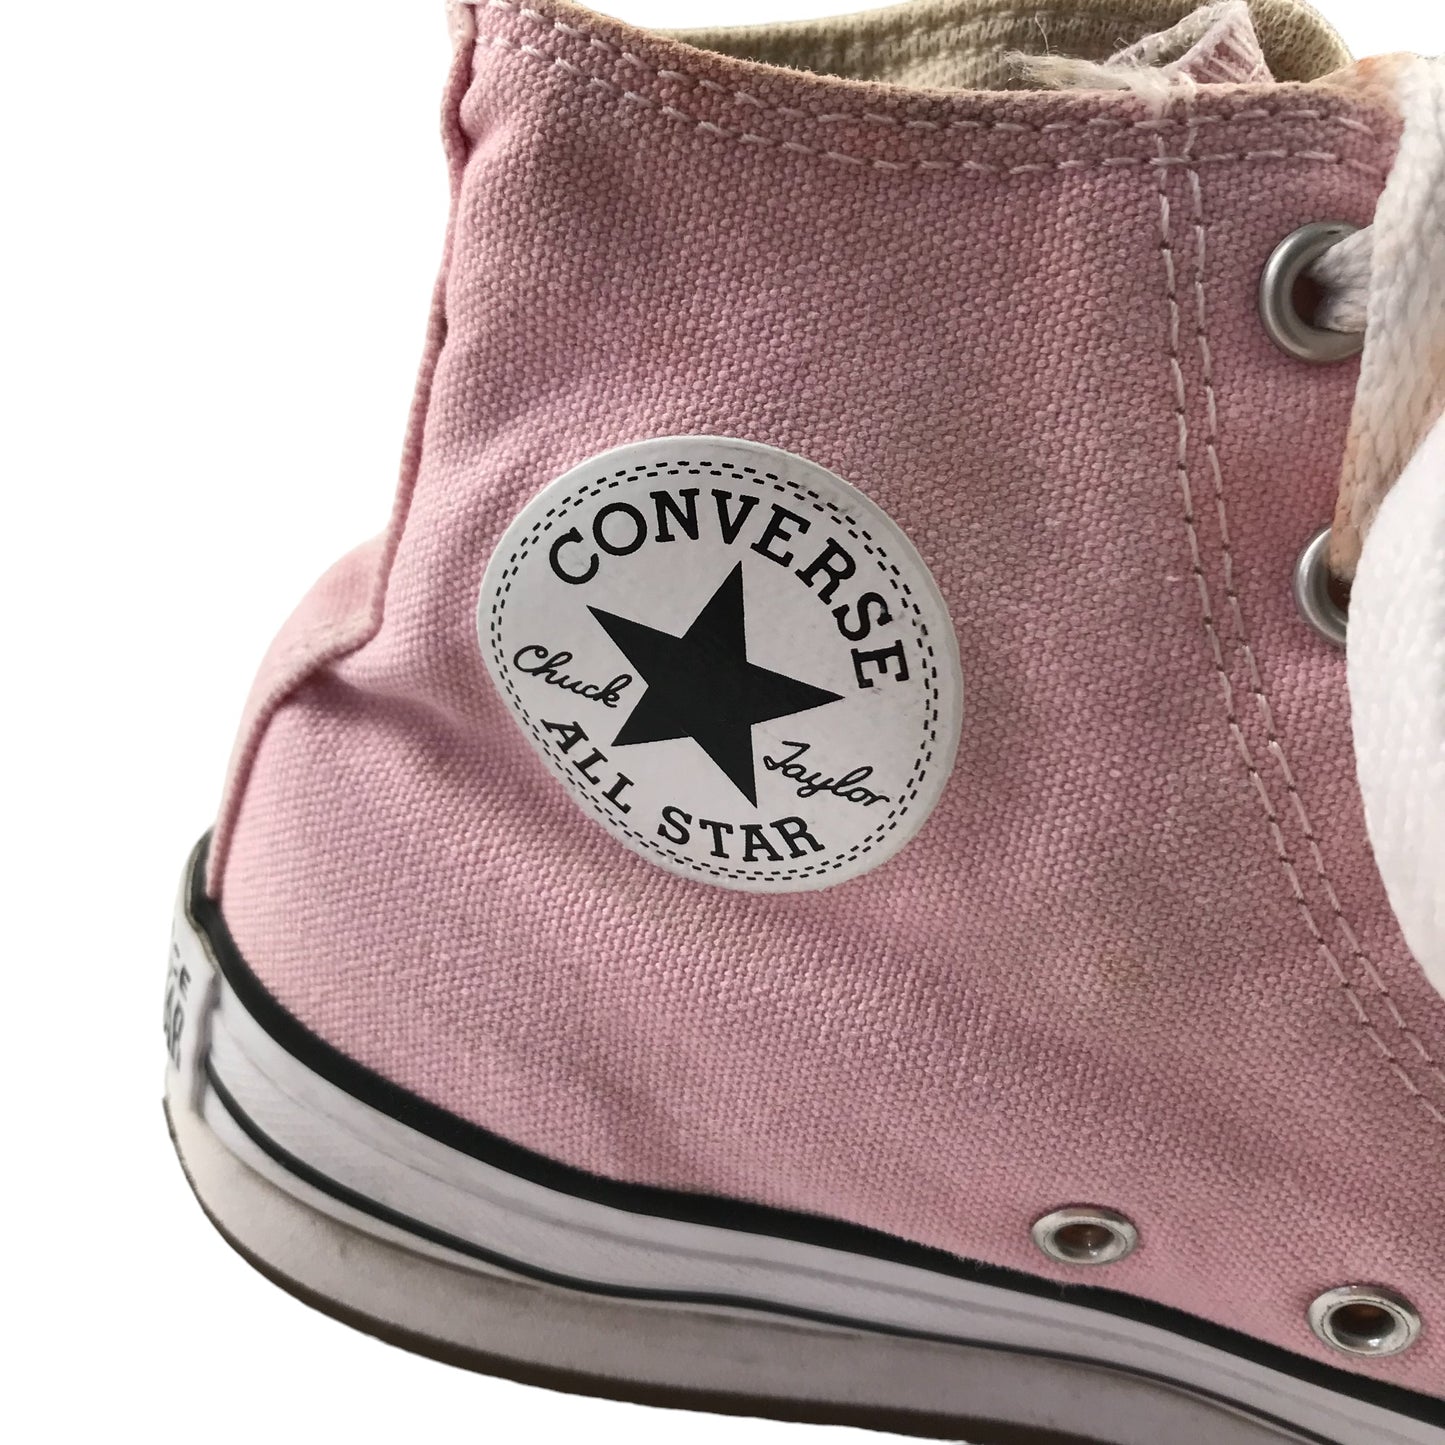 Converse Trainers Shoe Size 3 Light Pink Chunky Heel All Star Chuck Taylor High Tops